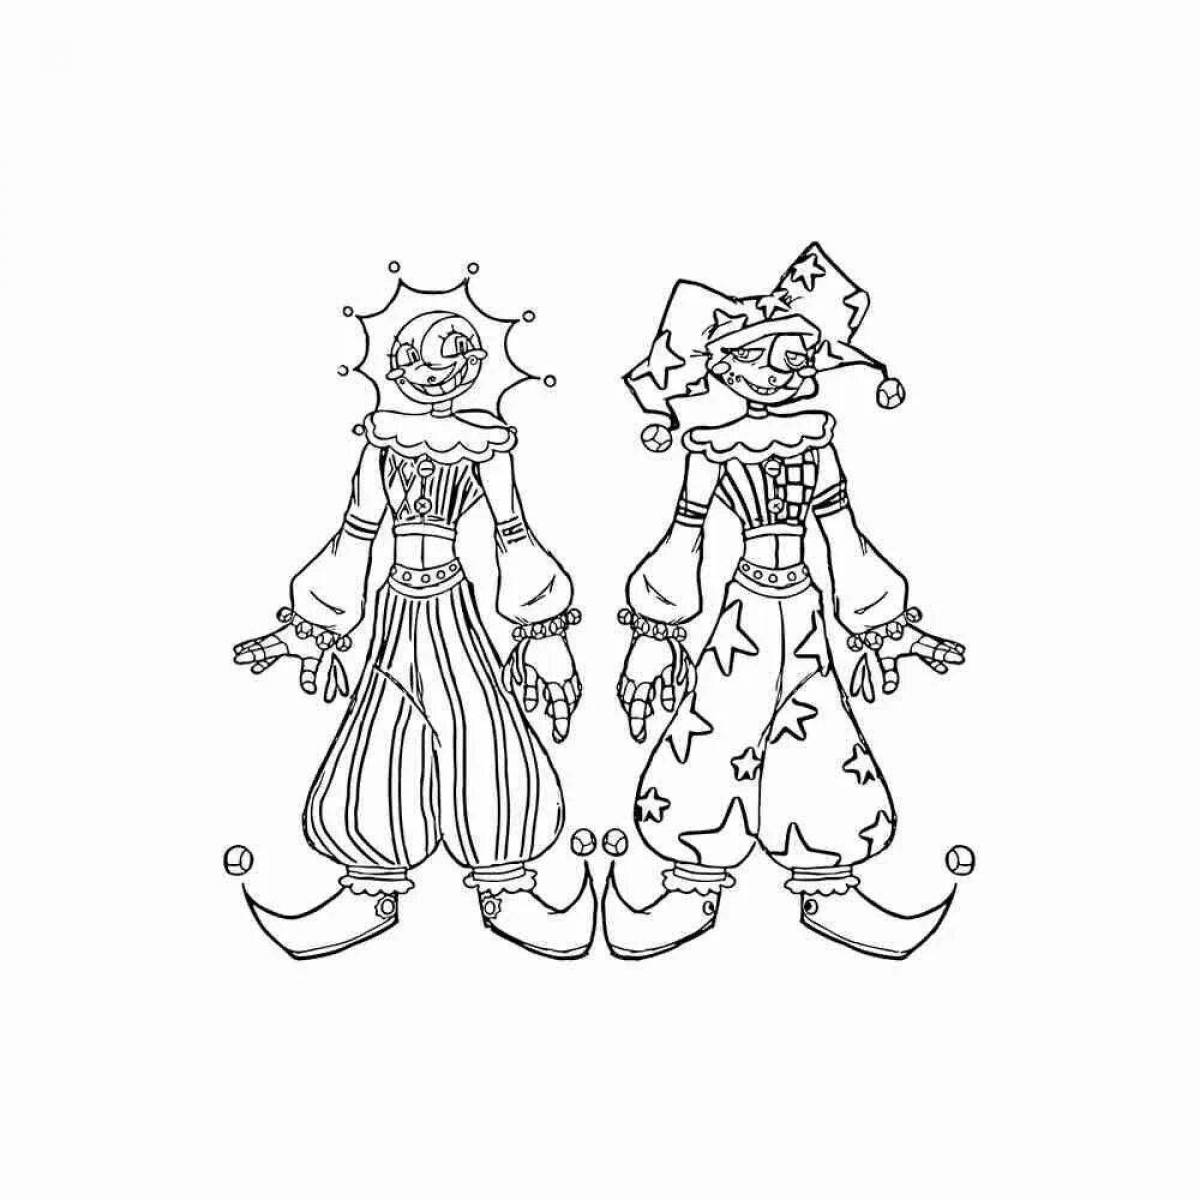 Fnaf 9 sun and moon coloring page